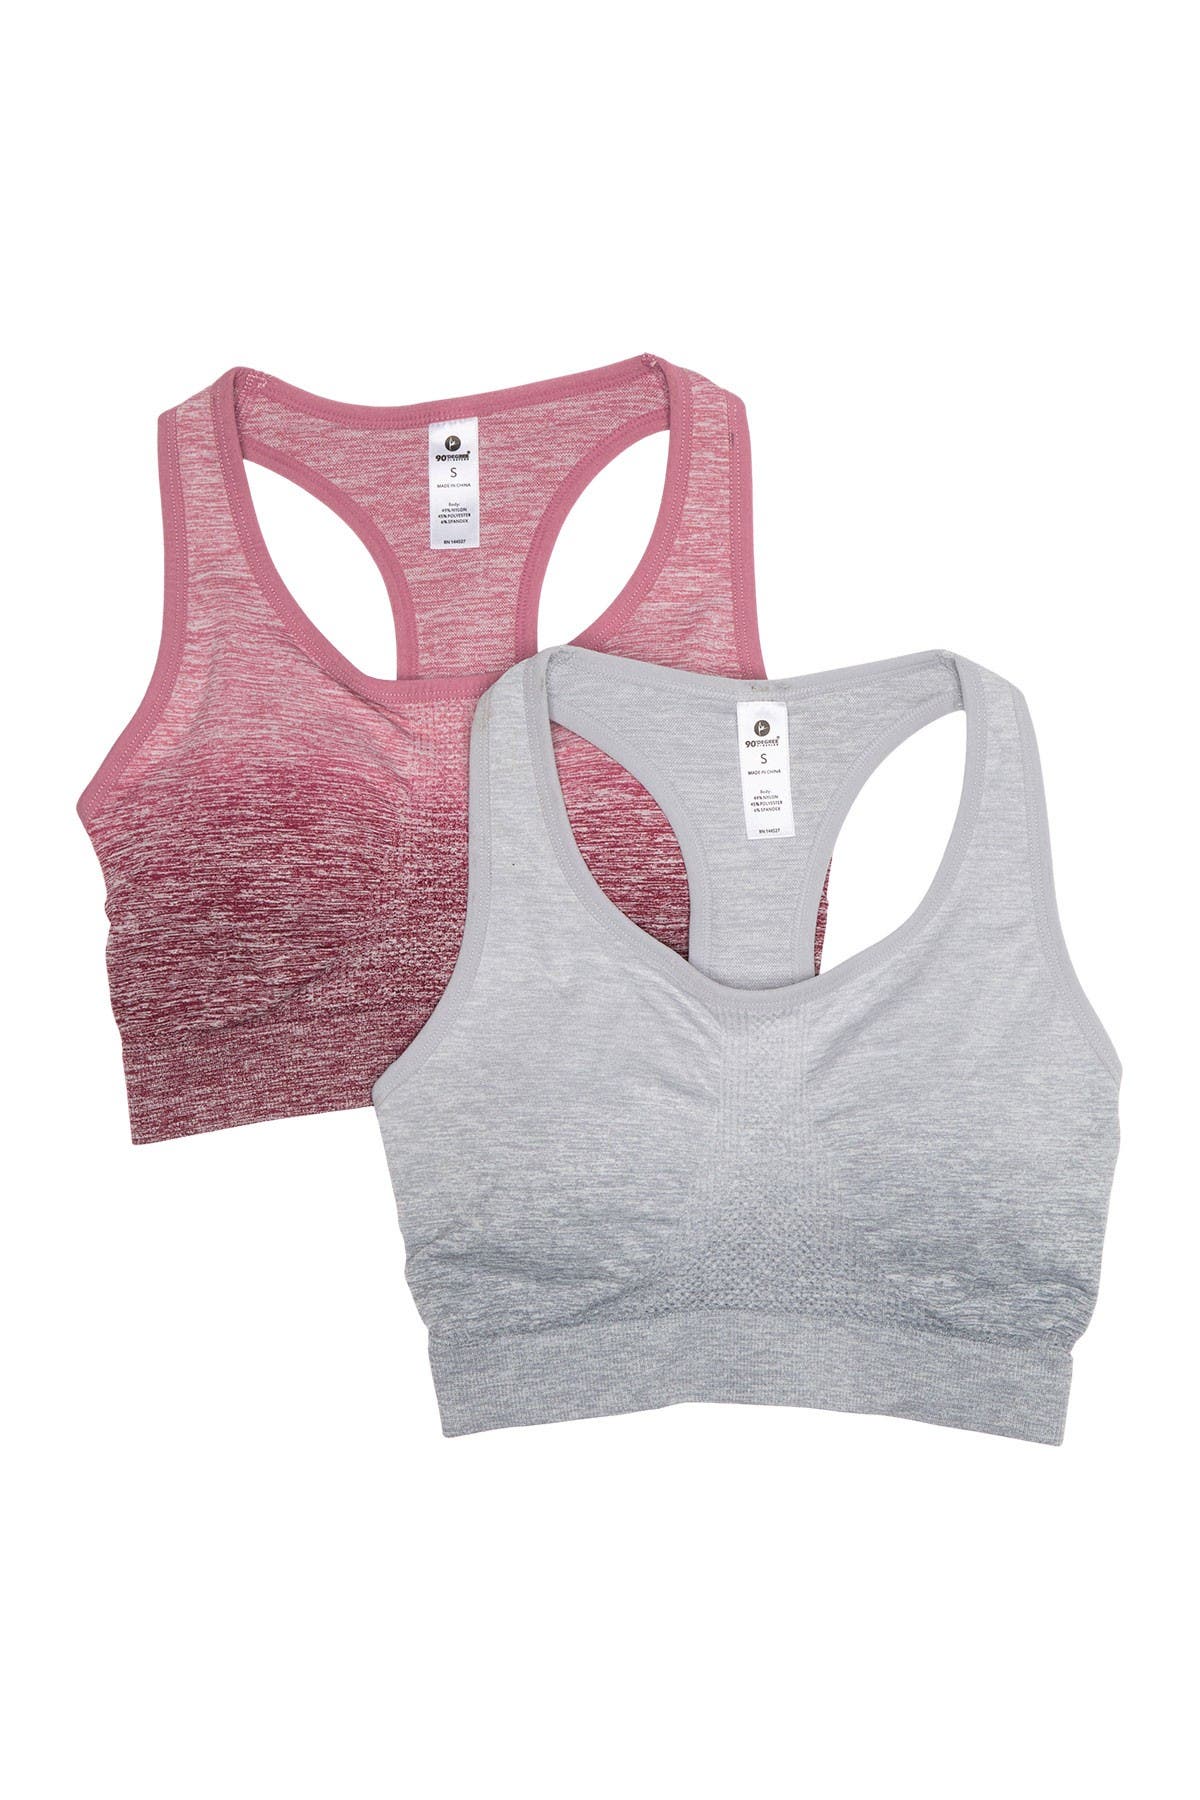 90 Degree By Reflex | Ombre Heathered Knit Seamless Sports Bra - Pack ...